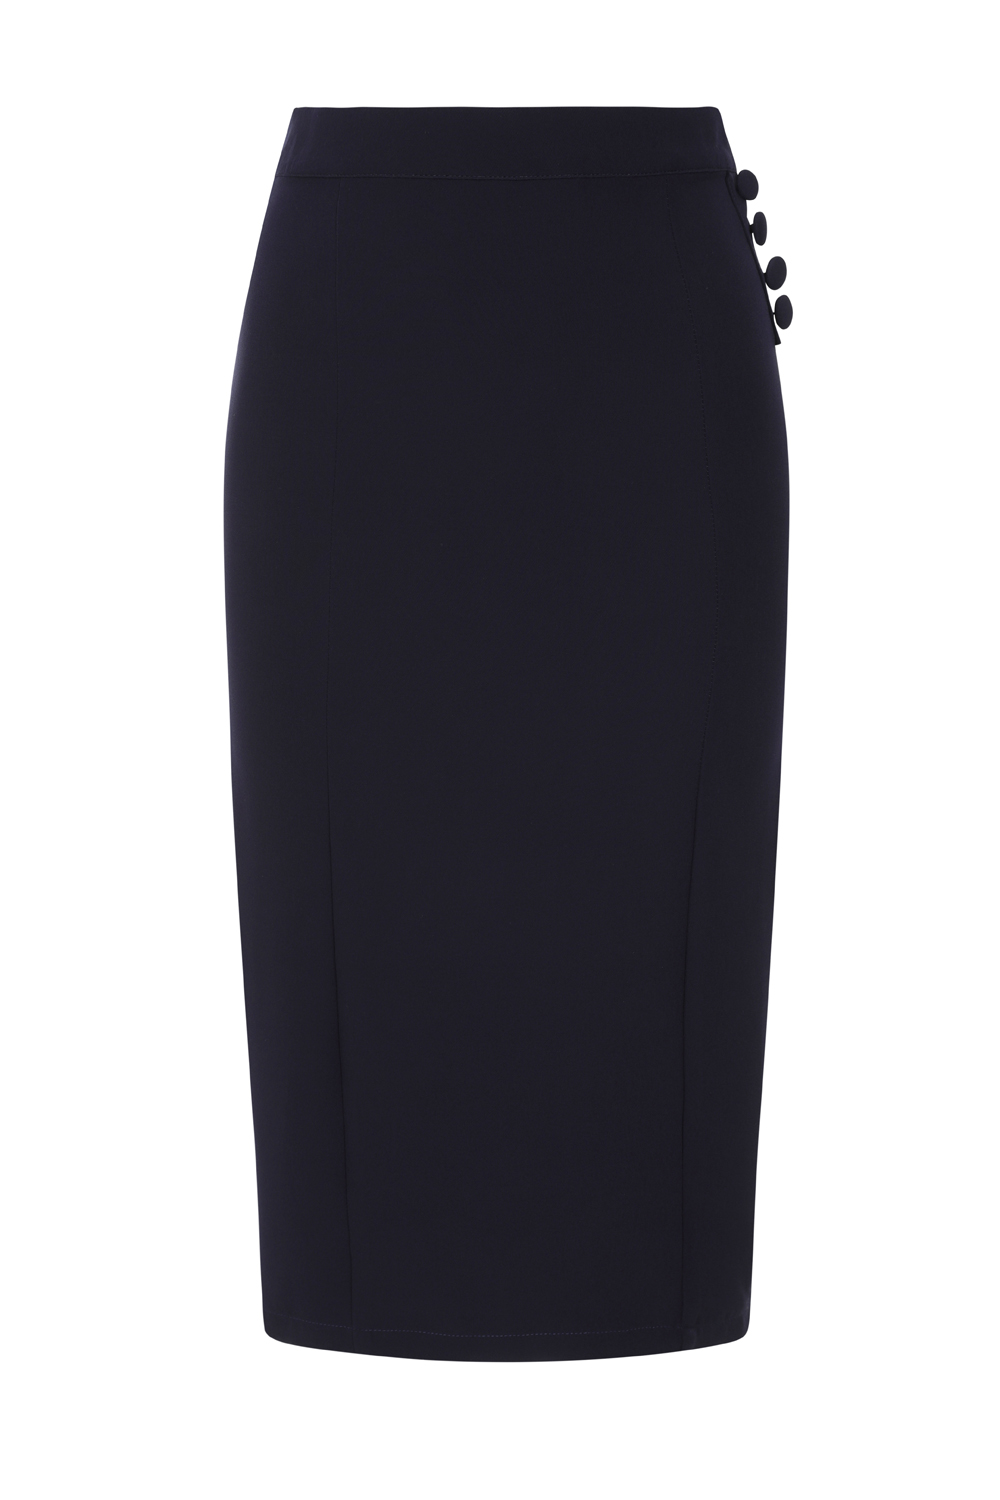 Riley Wiggle Skirt in Navy - Hearts & Roses London